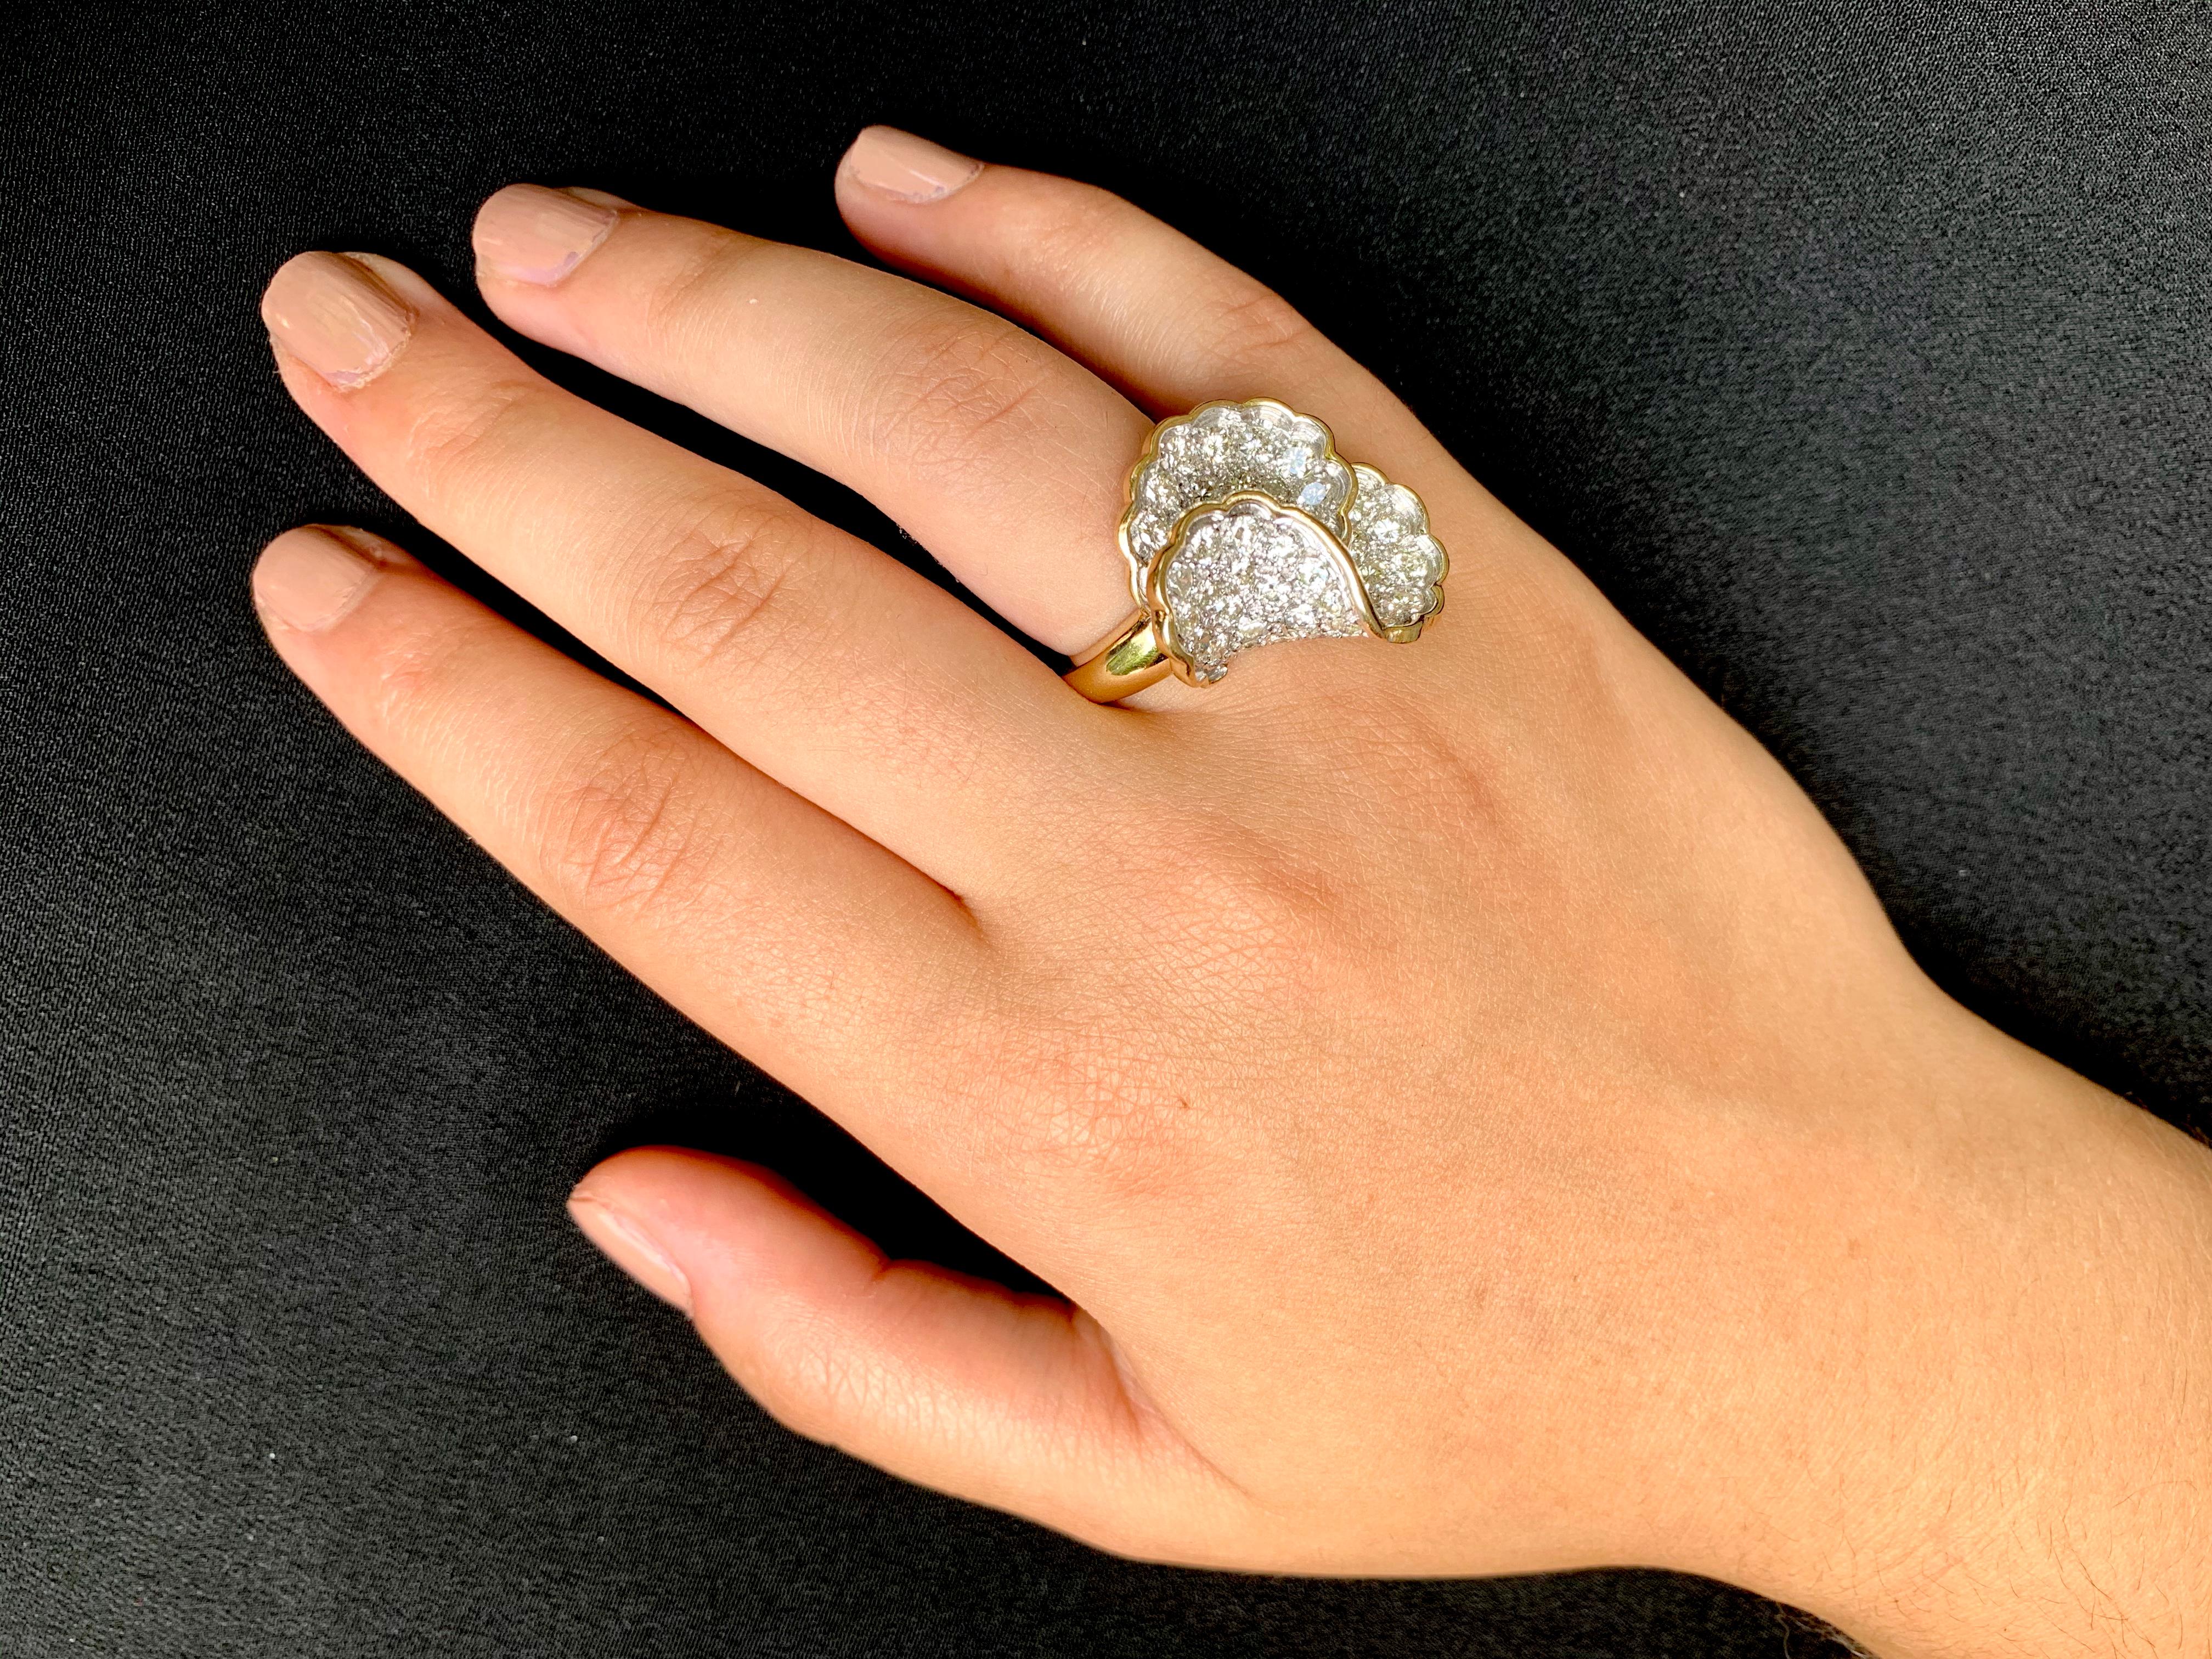 Substantial, very fine quality 3 TCW Pave diamond, 14k yellow and white gold Pansy ring.
In the language of flowers, Pansies, or Heartsease are rich in symbolism. The Pansy is a play on the French word Pensee, meaning 